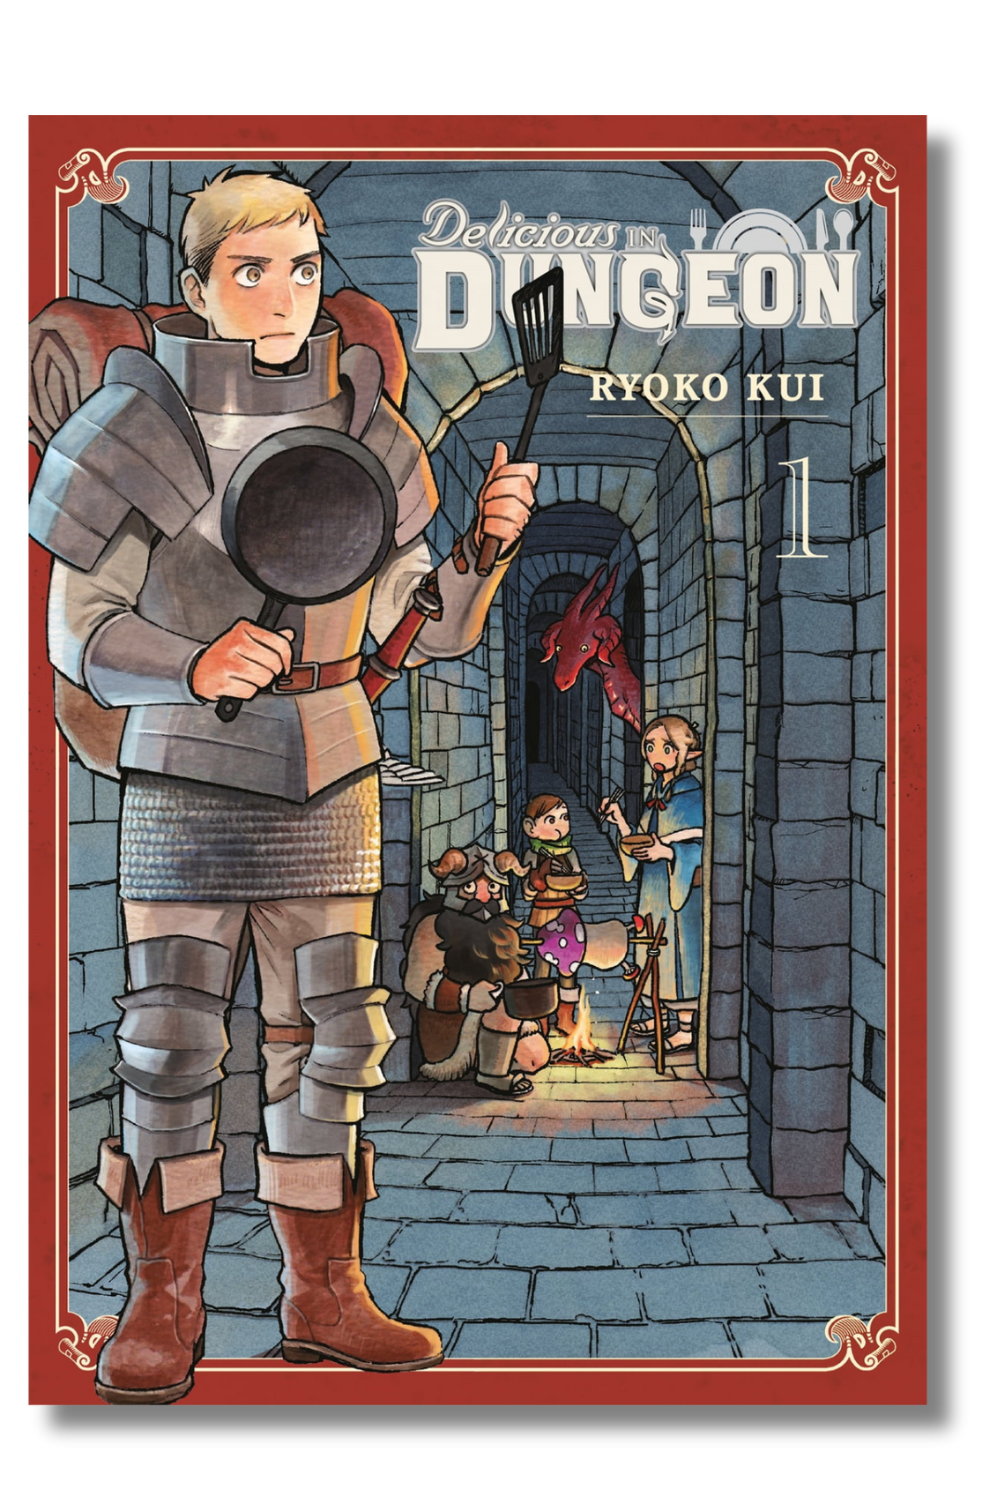 The cover of "Delicious in Dungeon" by Ryoko Kui, tr. by Taylor Engel